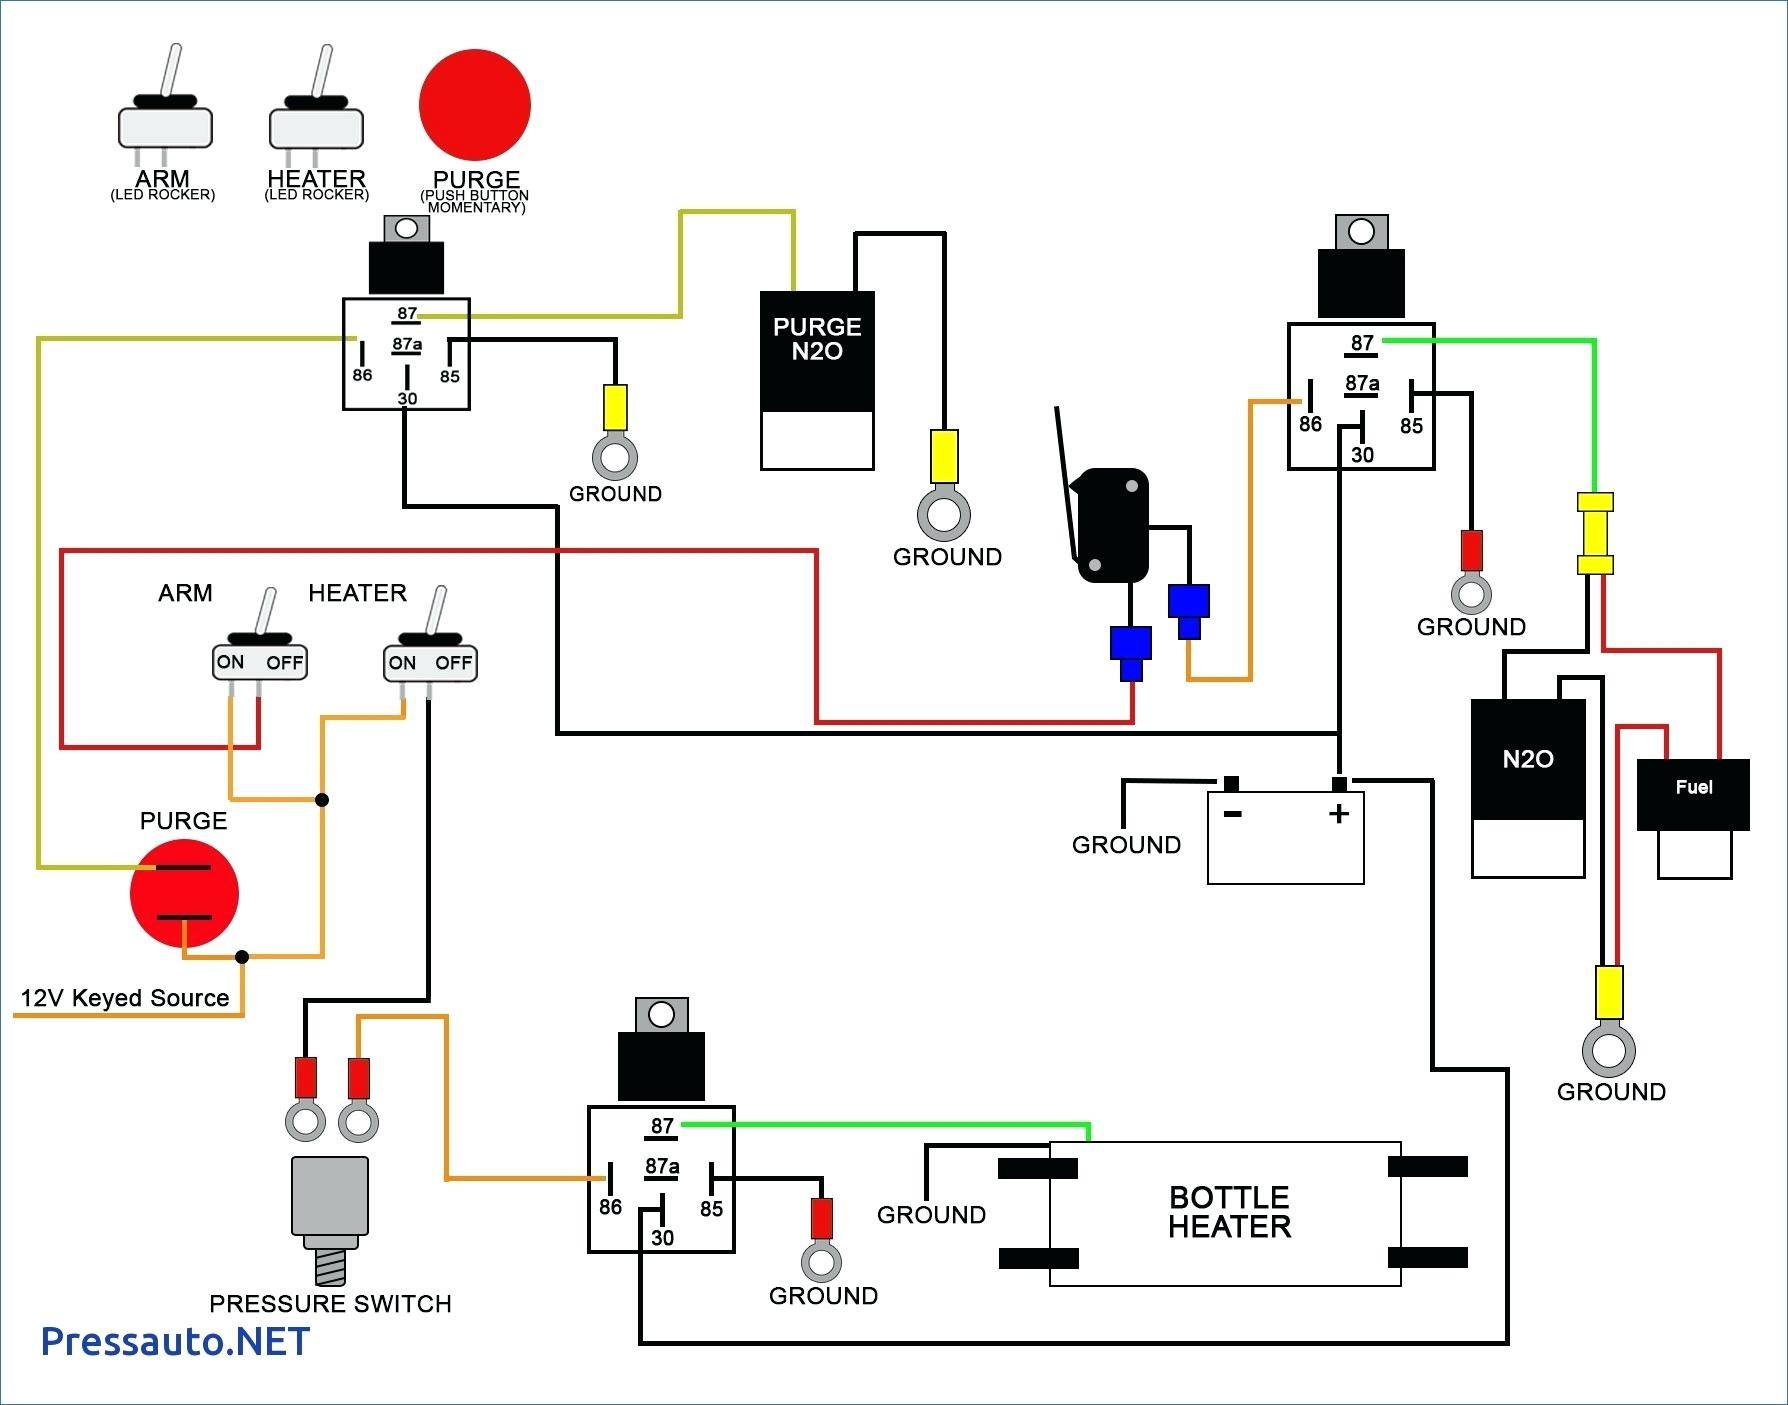 Double Pole toggle Switch Wiring Diagram Double Pole toggle Switch Wiring Diagram – Volovetsfo – Wiring Of Double Pole toggle Switch Wiring Diagram